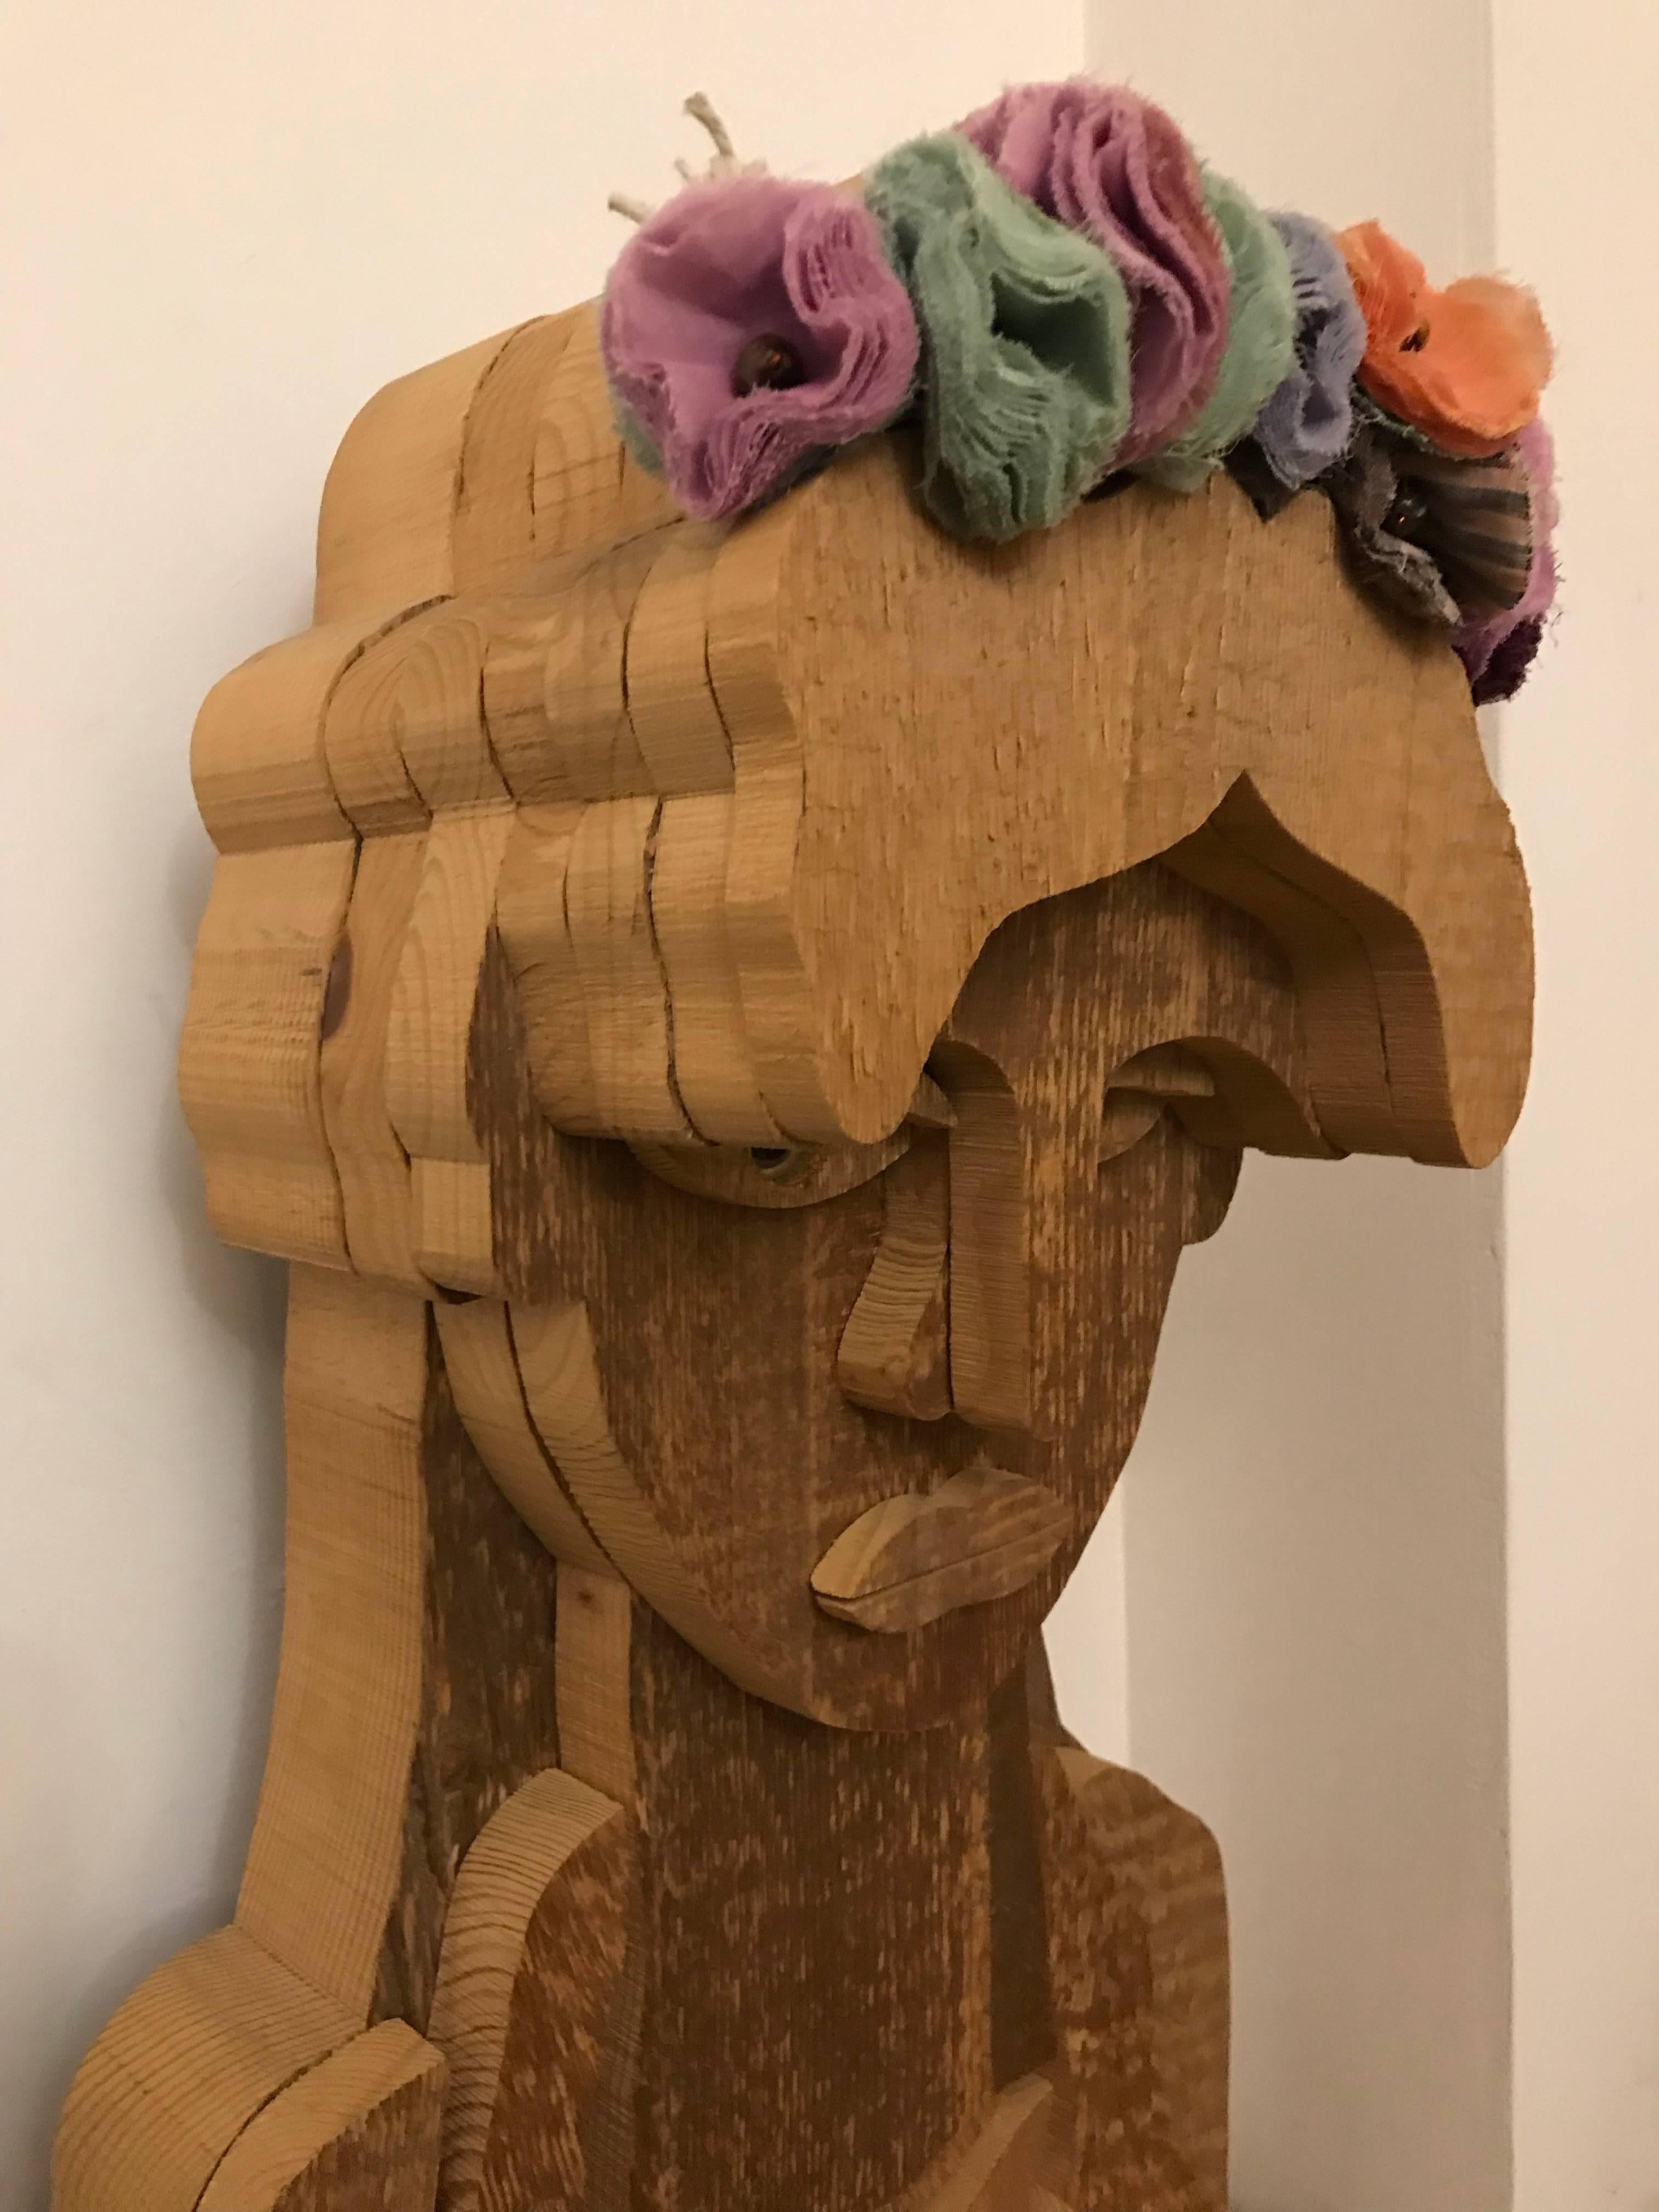 Enchanting sculpture by Michelangeli. This sculpture takes inspiration from a roman woman decorated with fabric flowers. Made in seasoned solid fir wood. This ageing technique of the fir, distinctive of the Bottega G. Michelangeli, take place